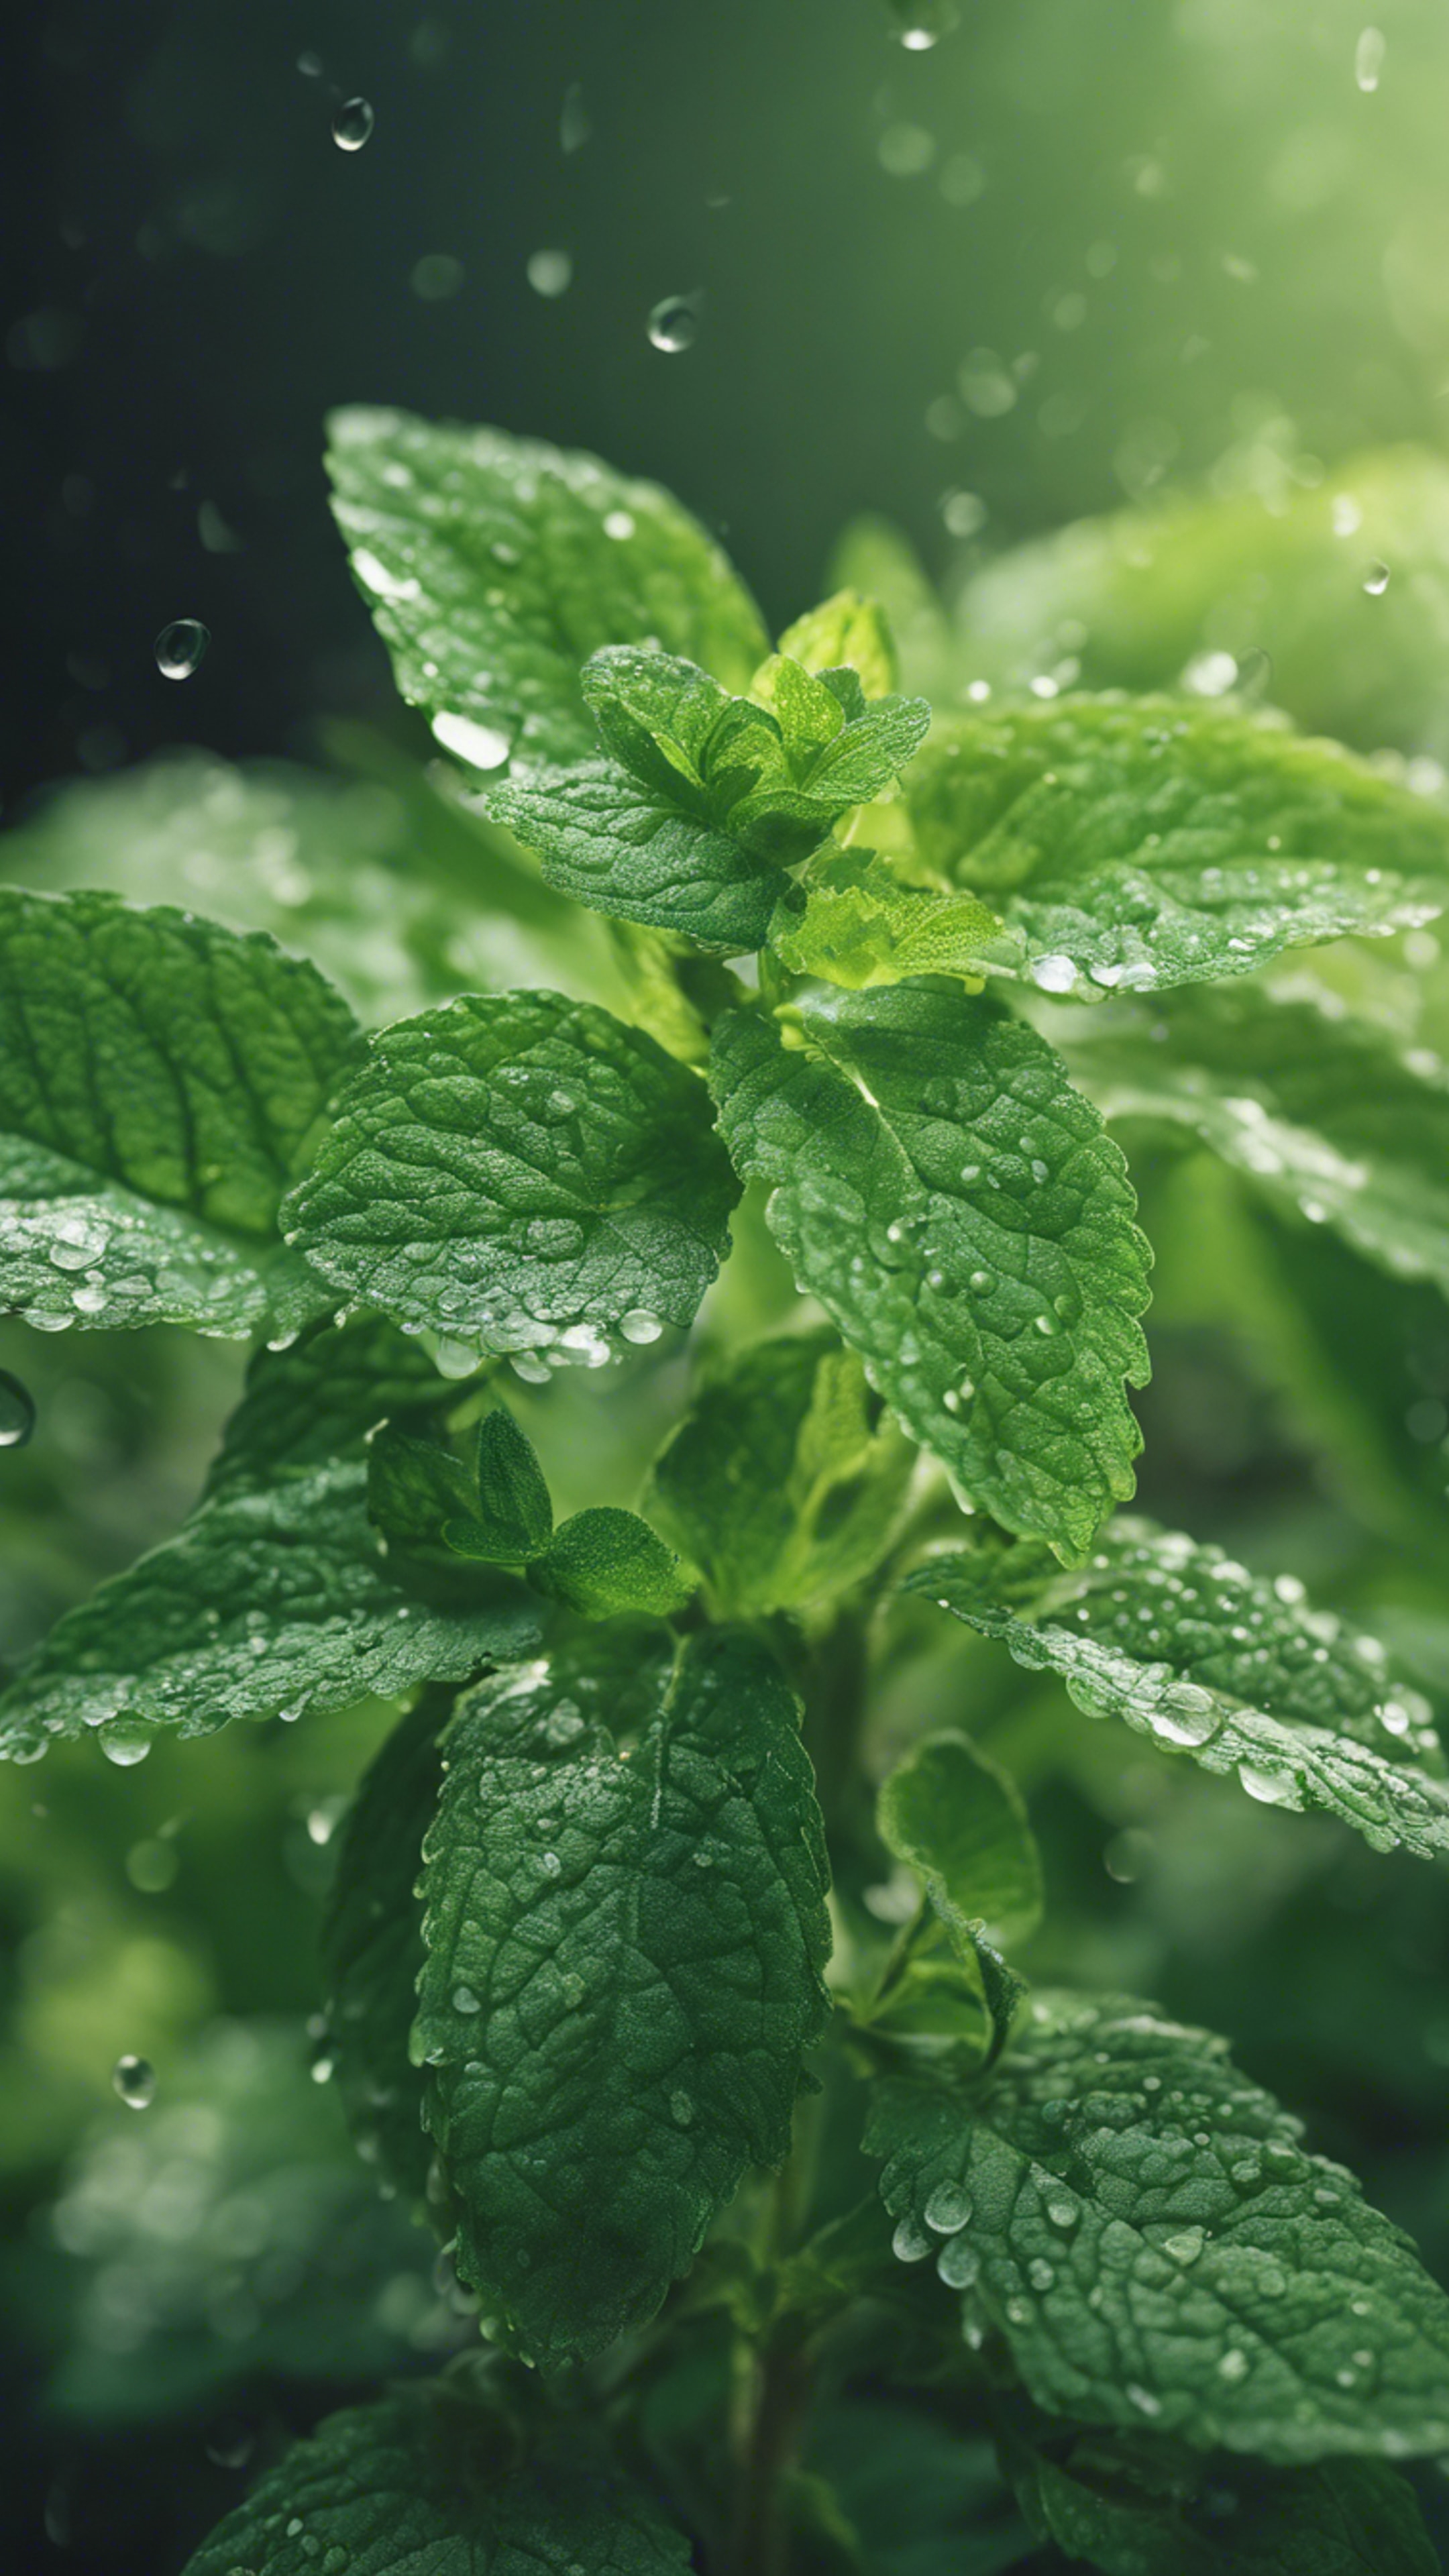 A closeup of a refreshing mint plant with dew drops on its fresh green leaves. Hintergrund[bde7a5587e54449fbb31]